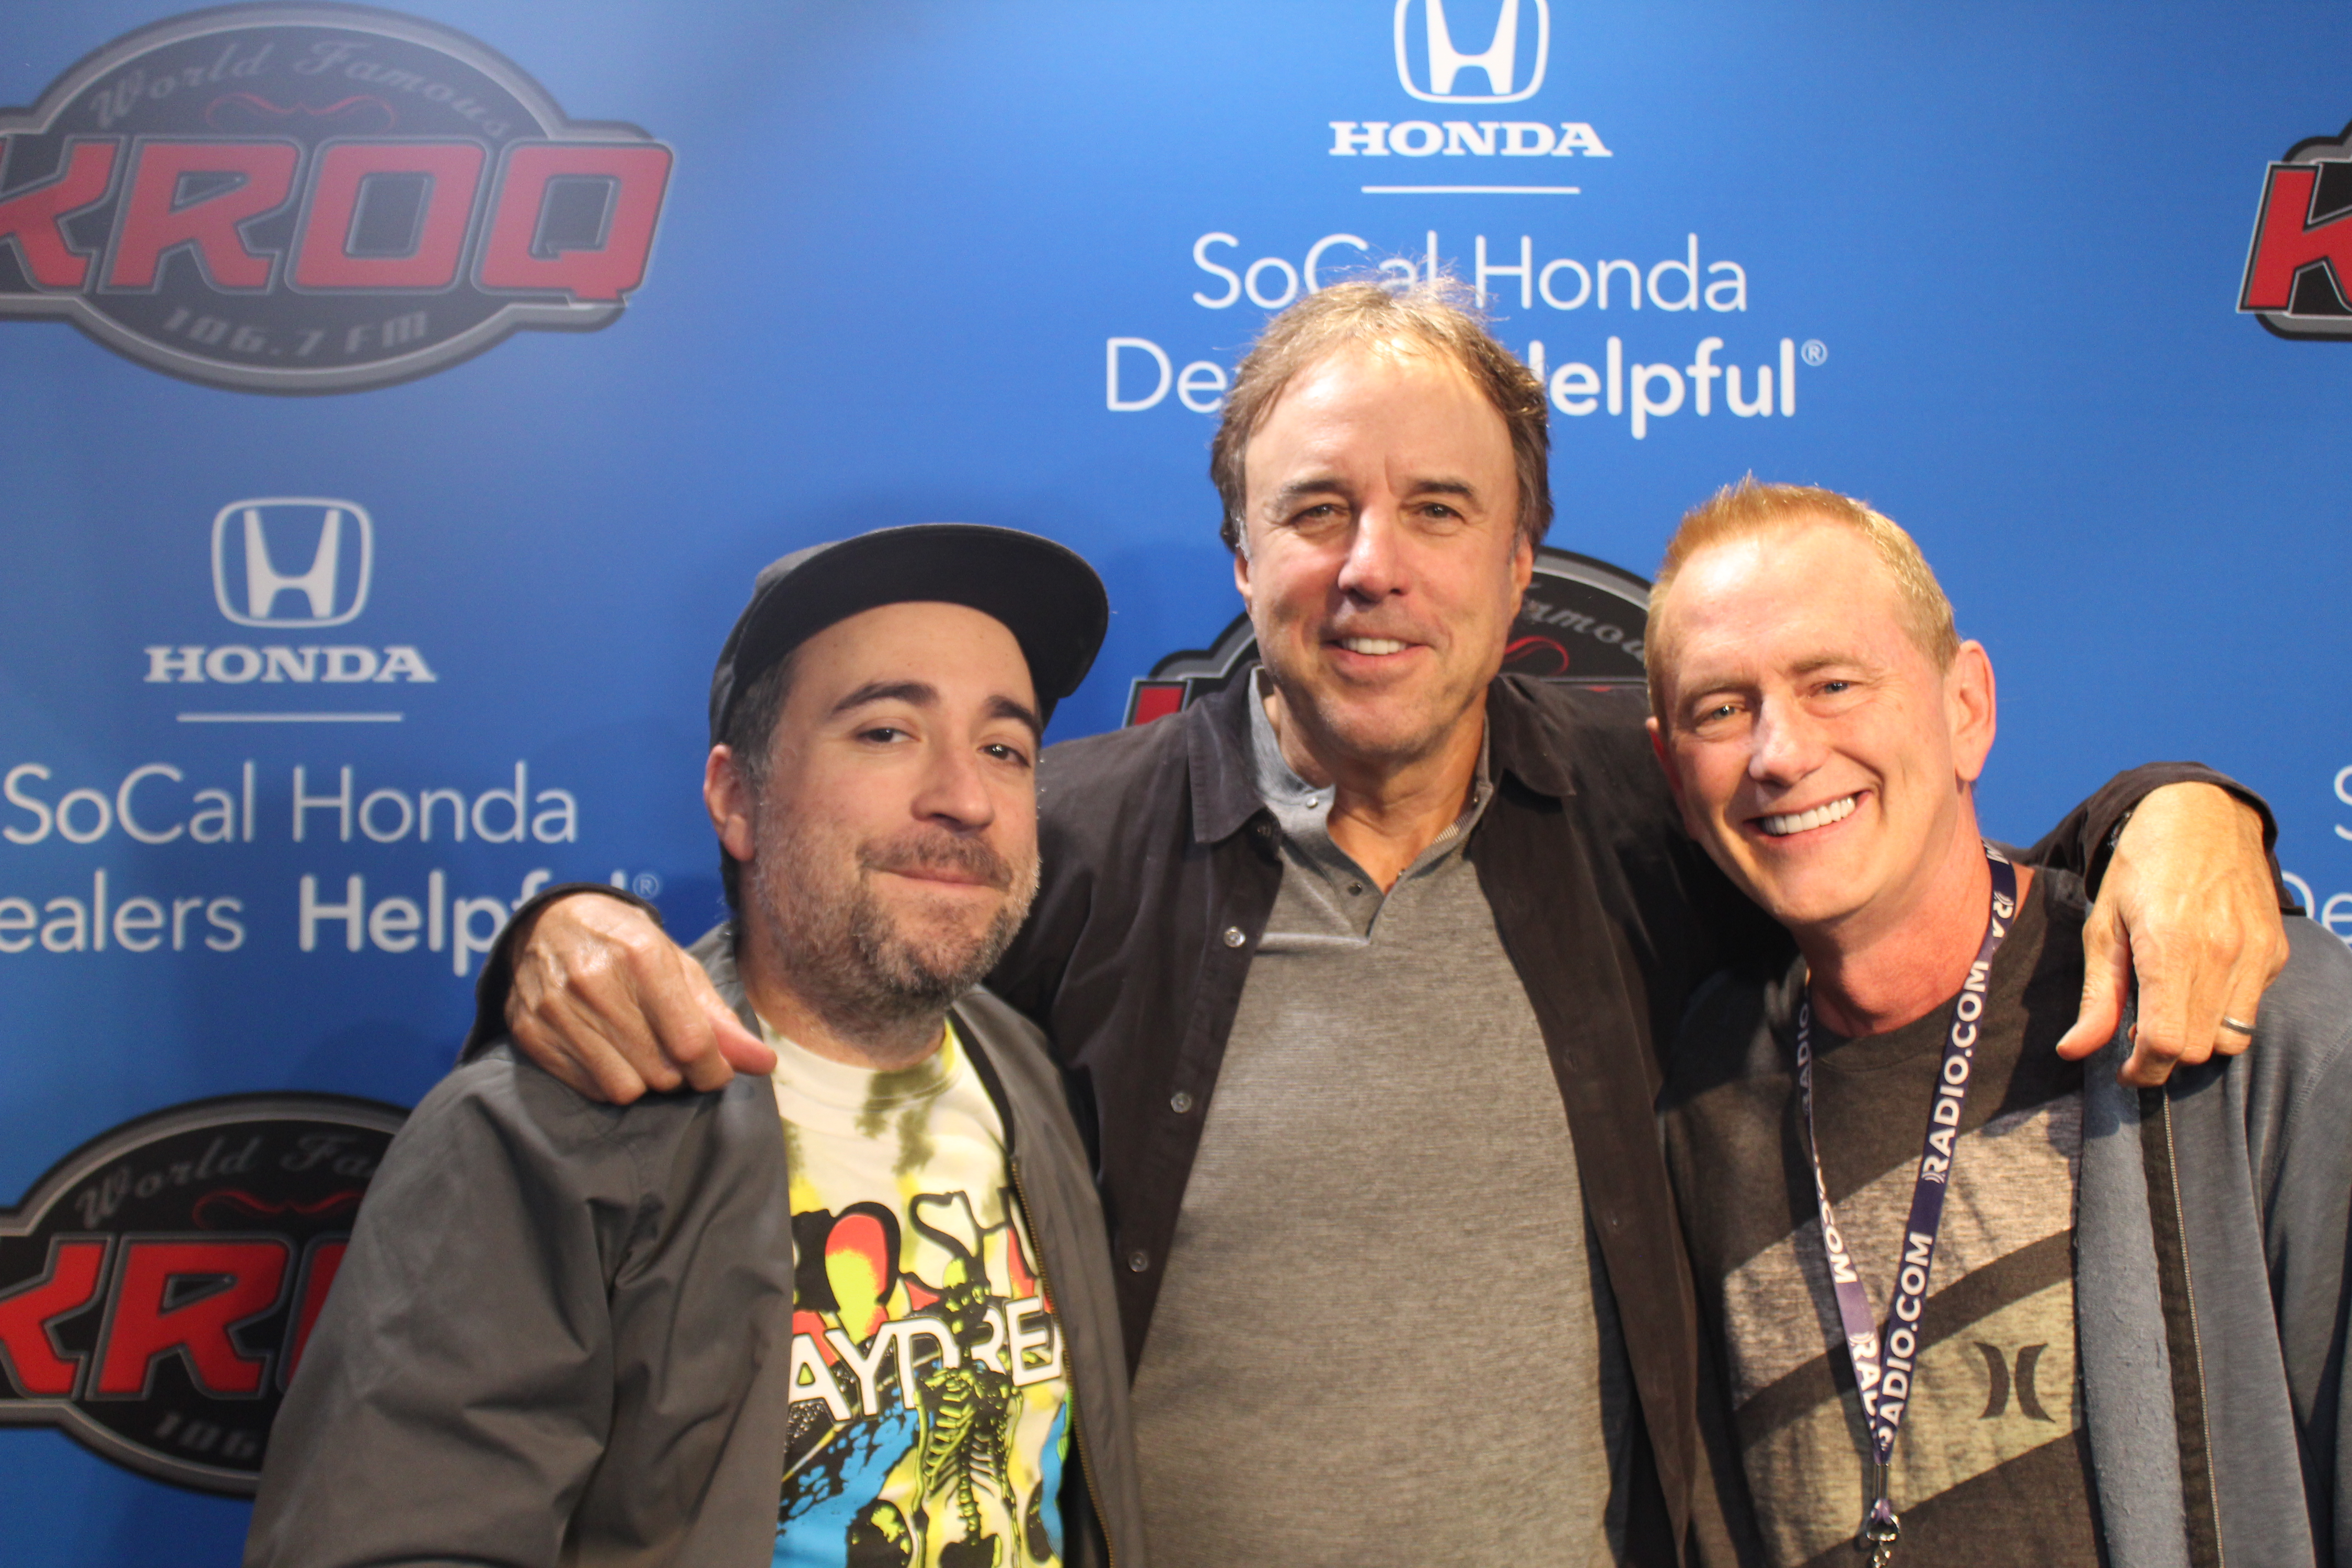 Wednesday, October 24th with guests: Kevin Nealon and Brad Williams